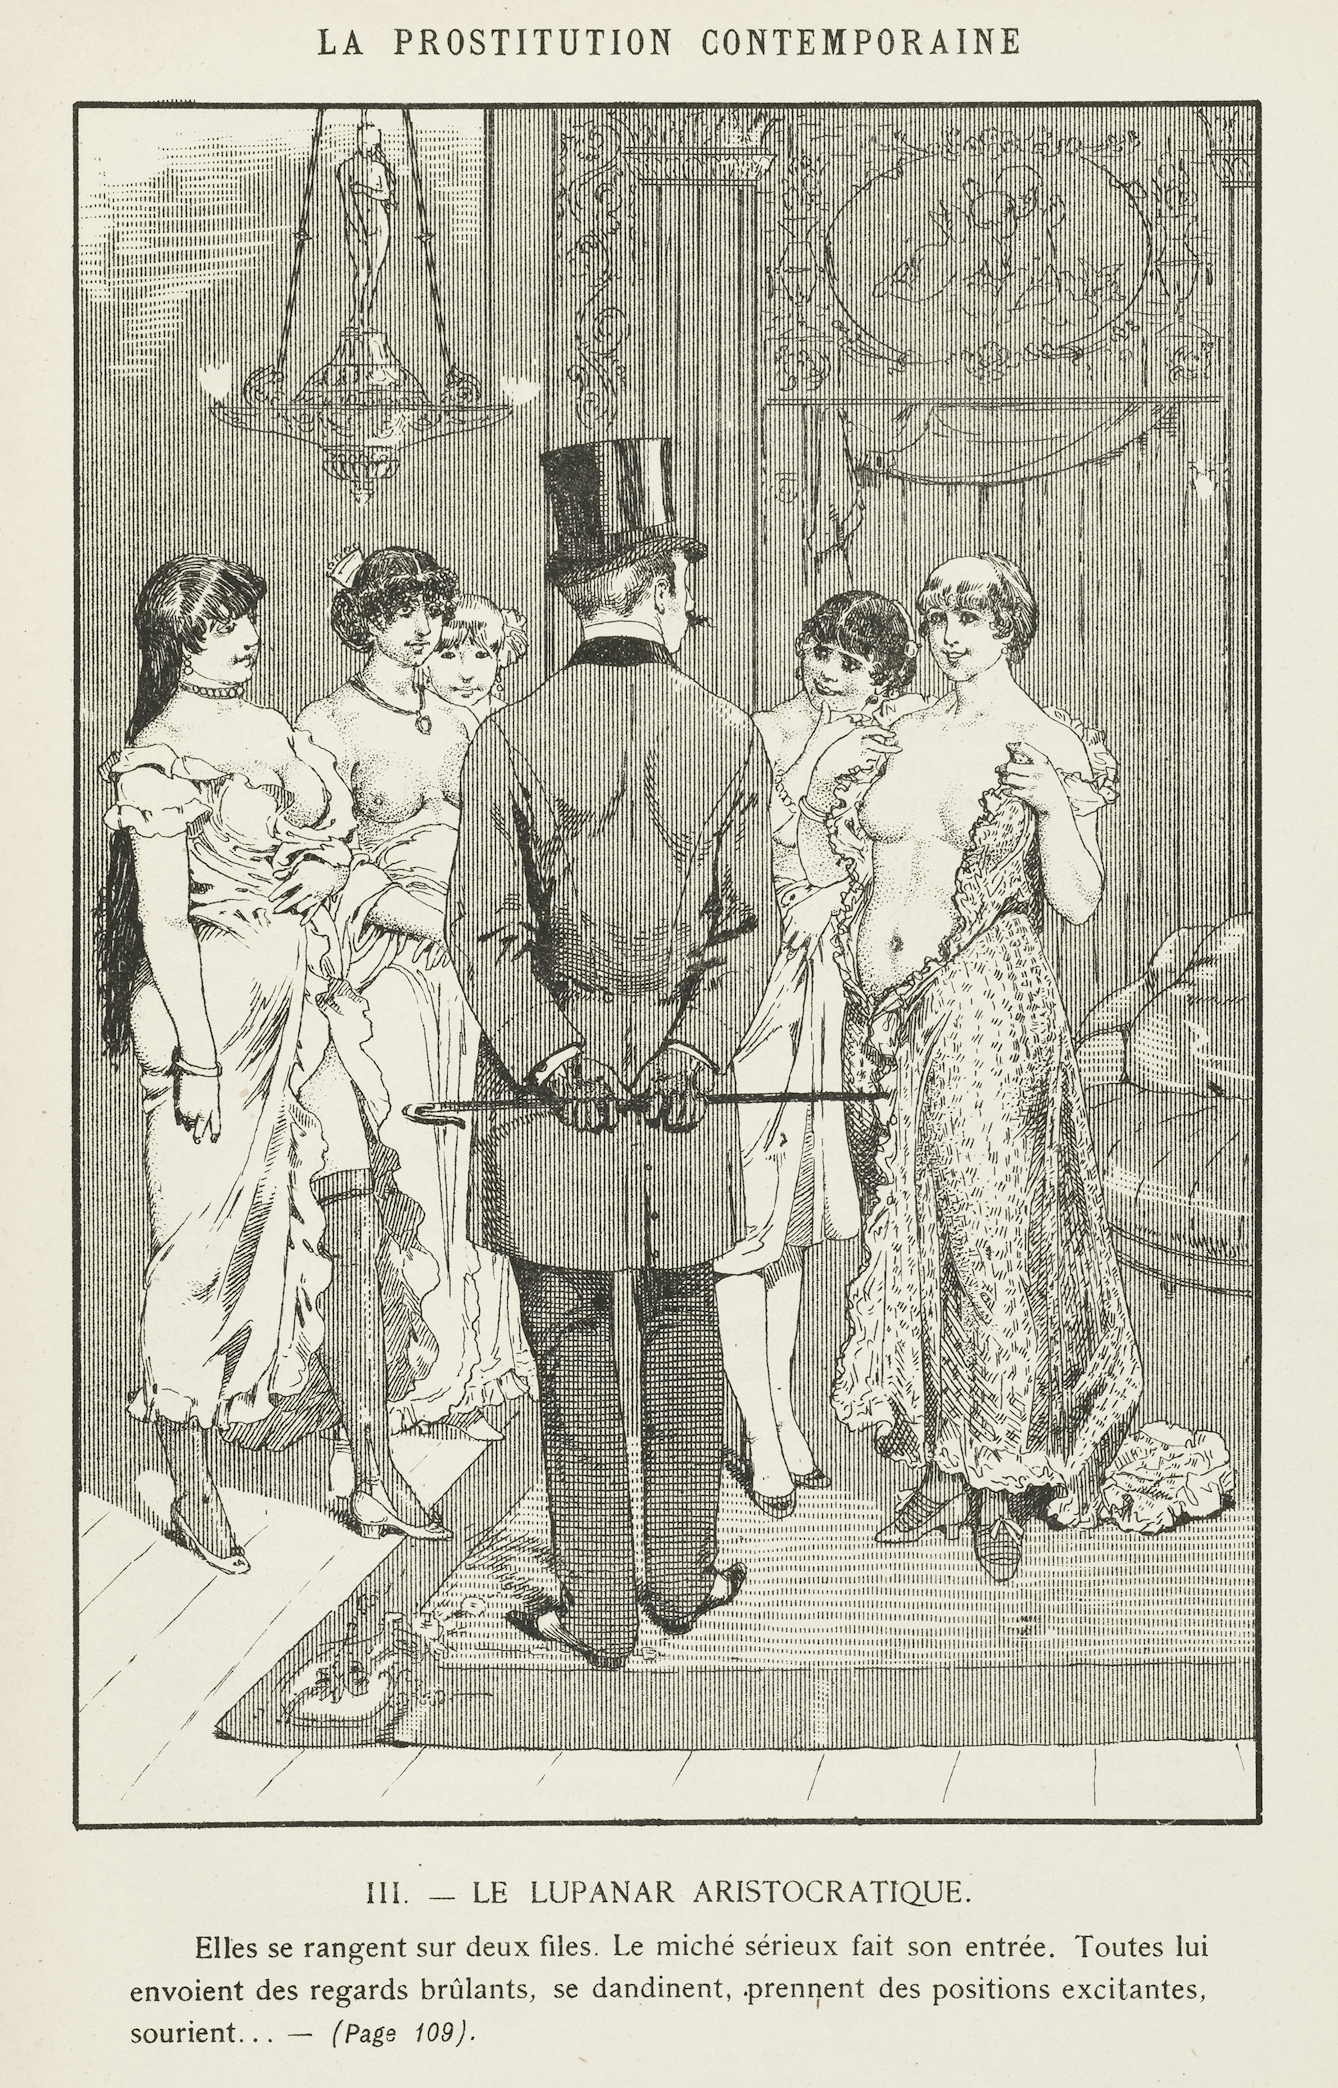 A well-dressed client inspects the prostitutes at a brothel